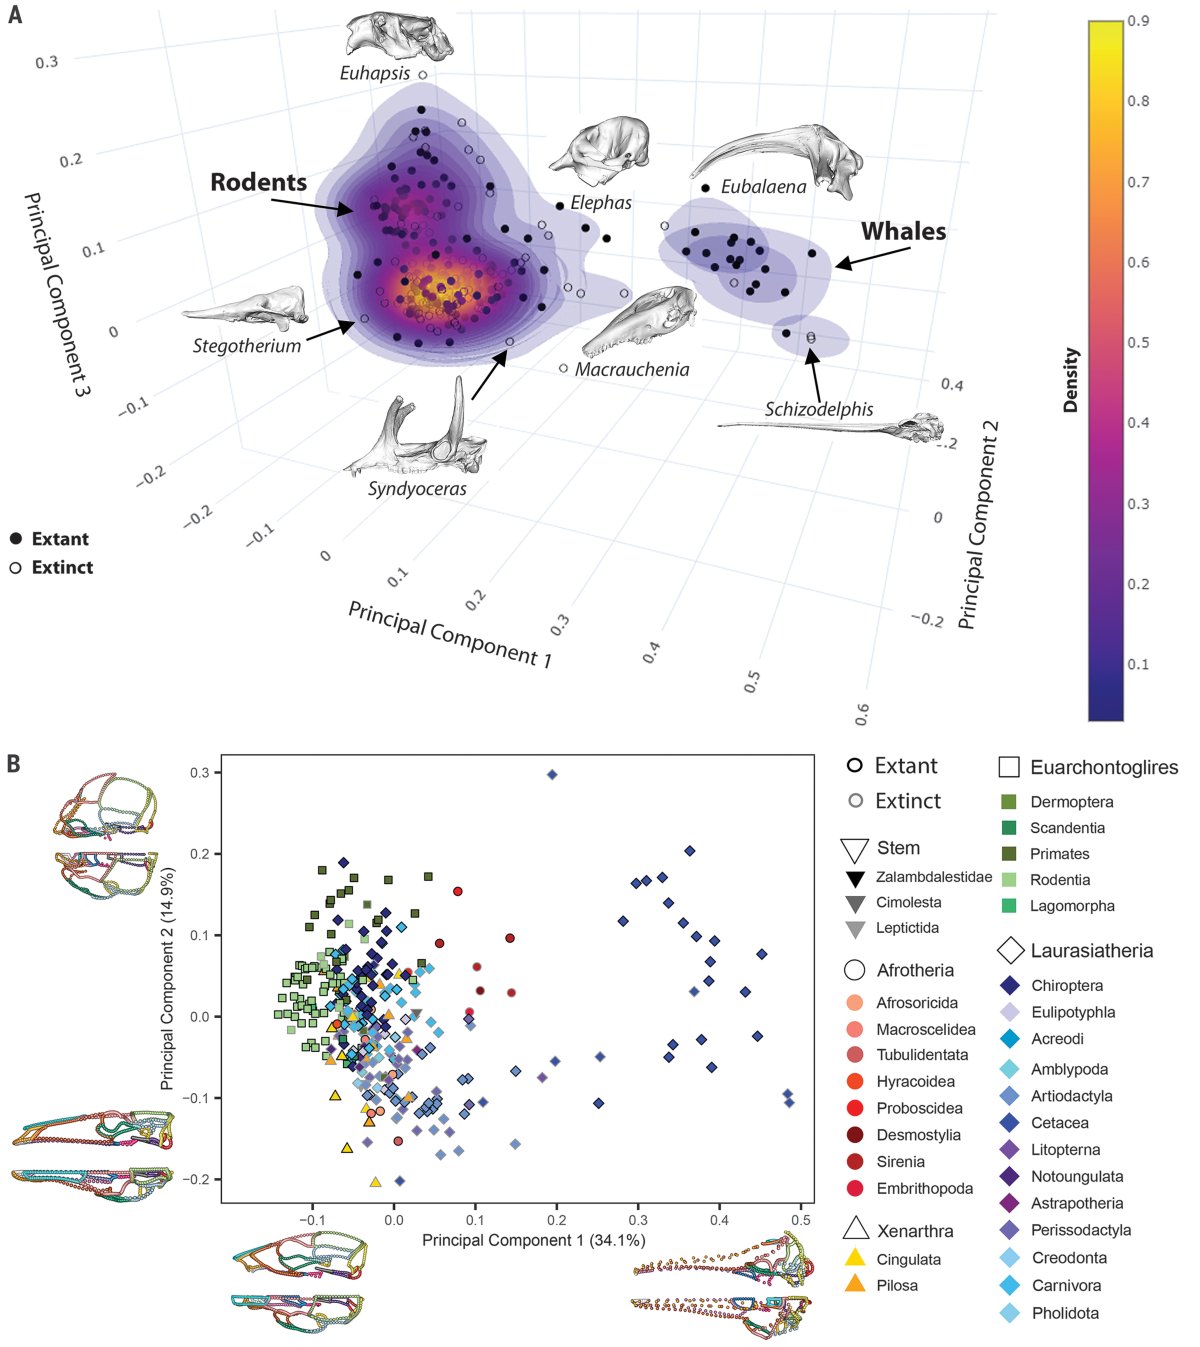 Cranial variation across placental mammals is highly concentrated